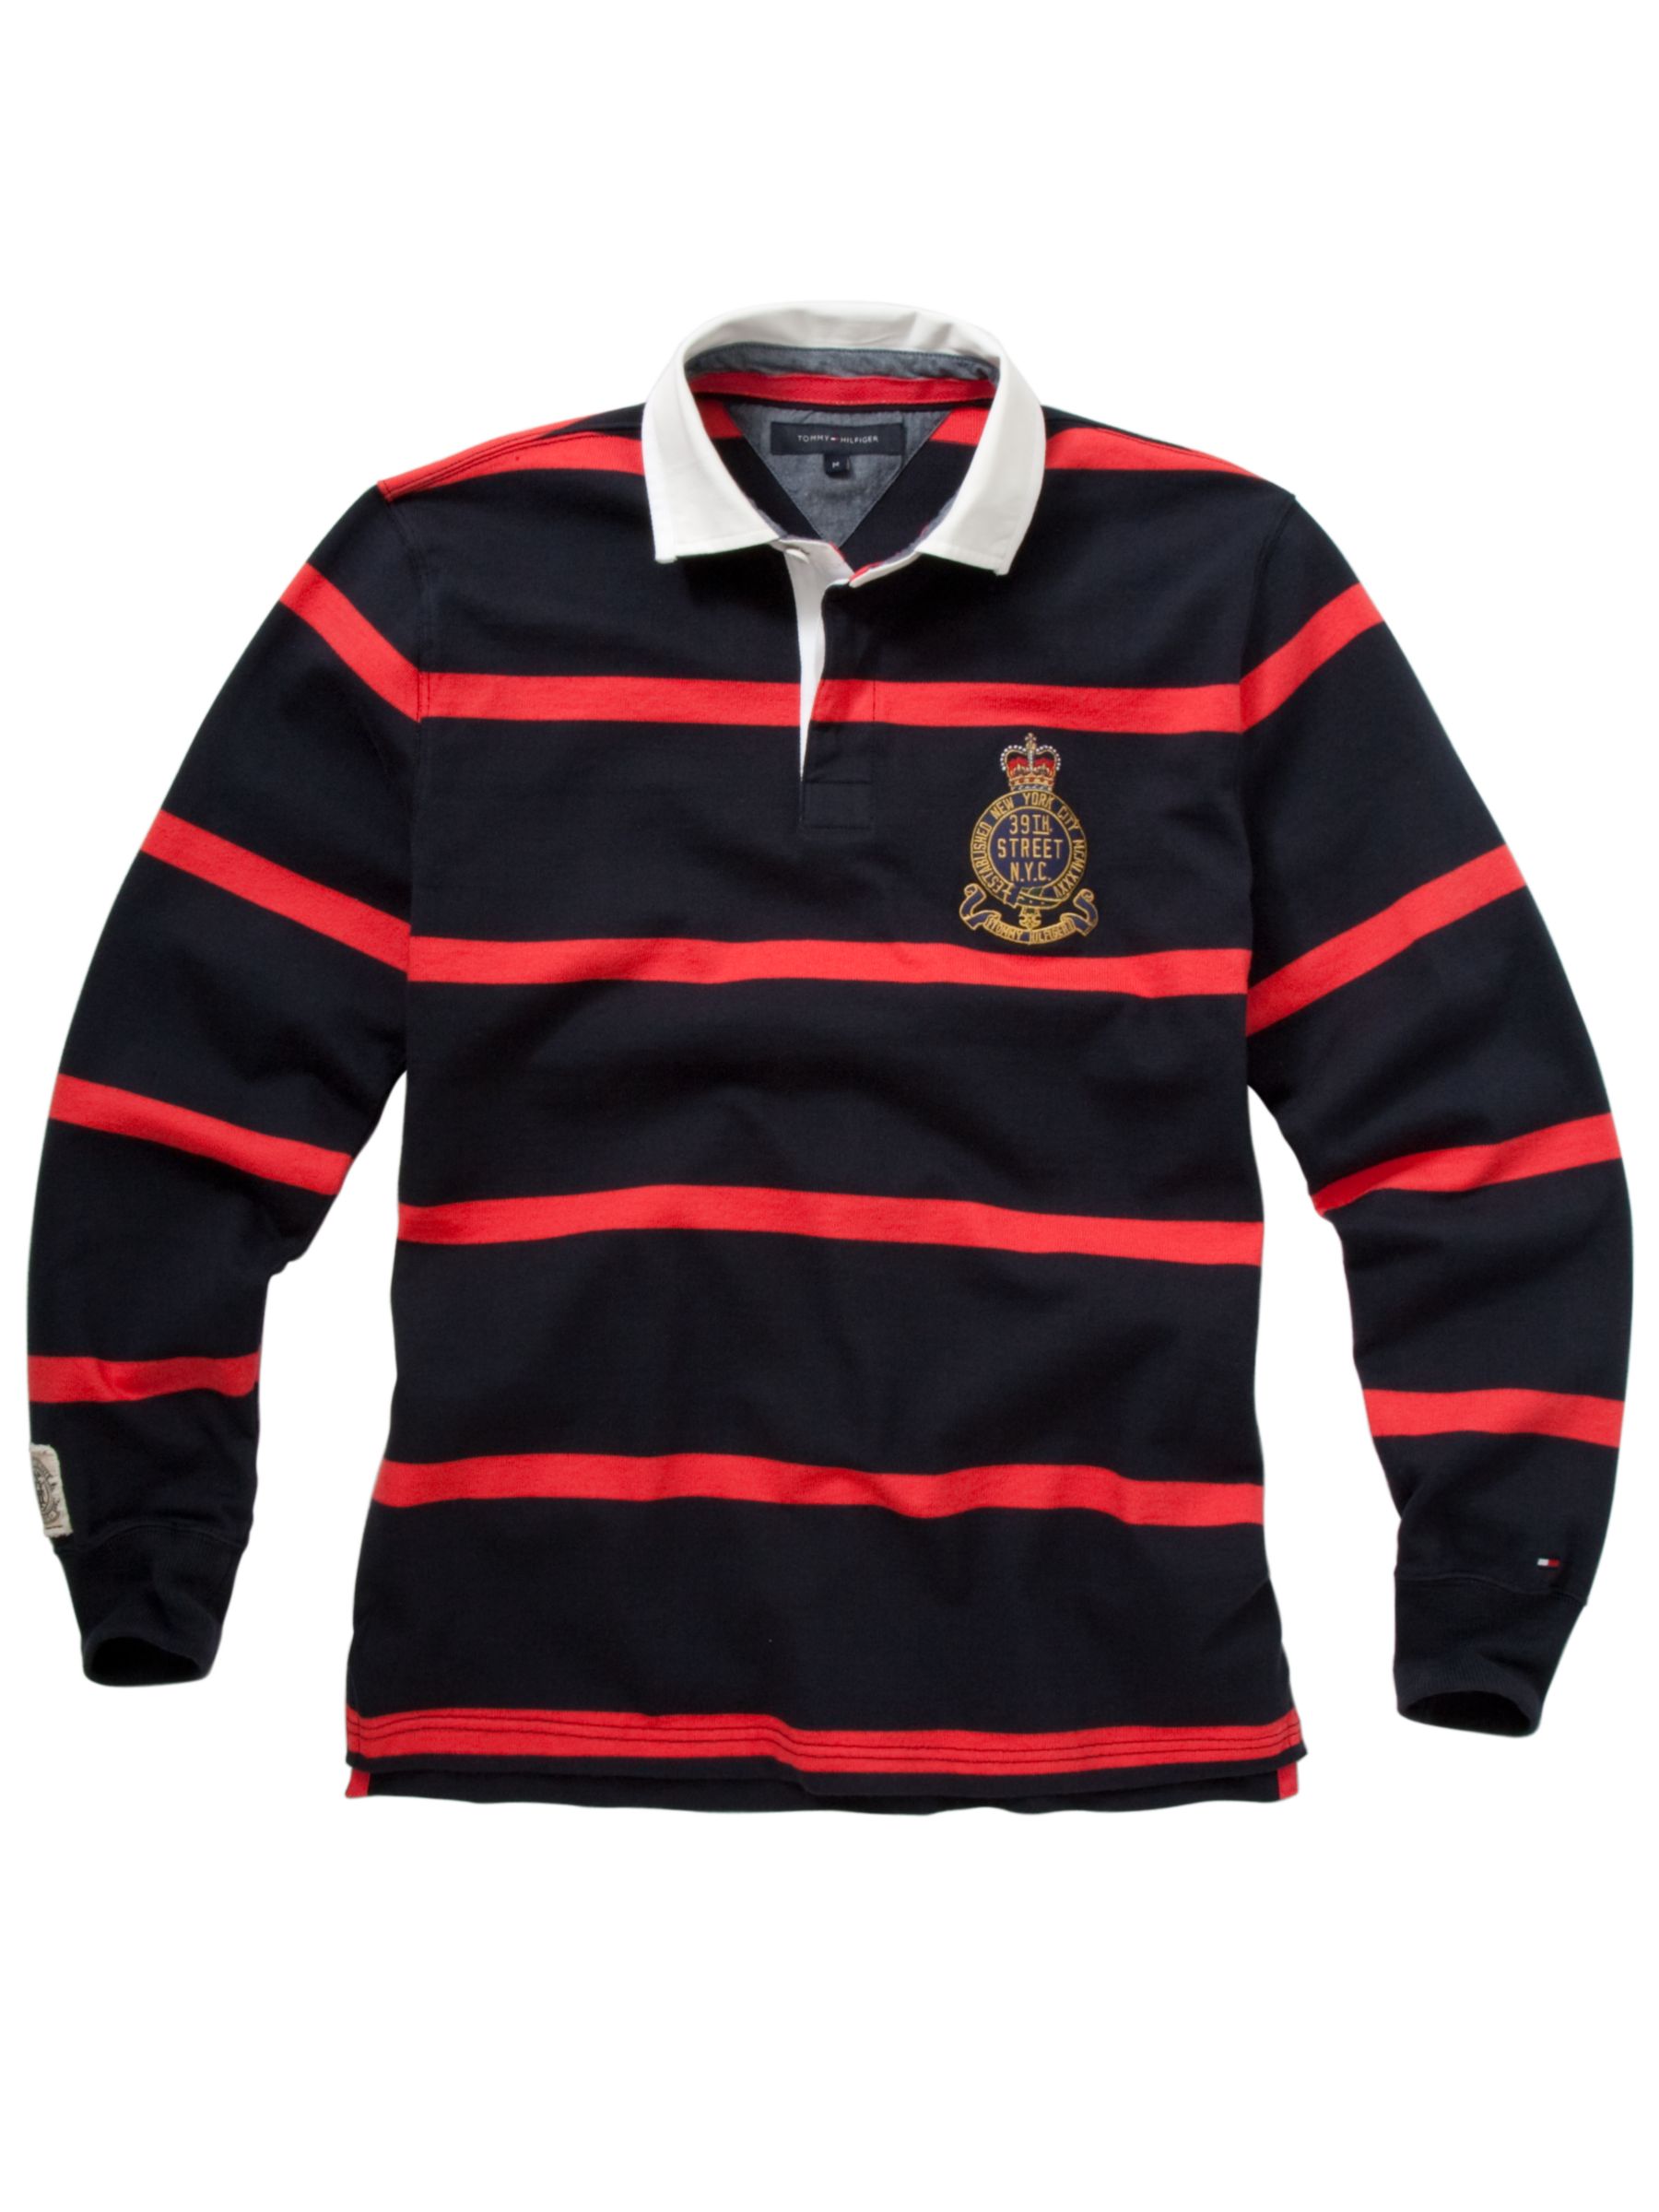 Pascal Rugby Shirt, Black/Coral